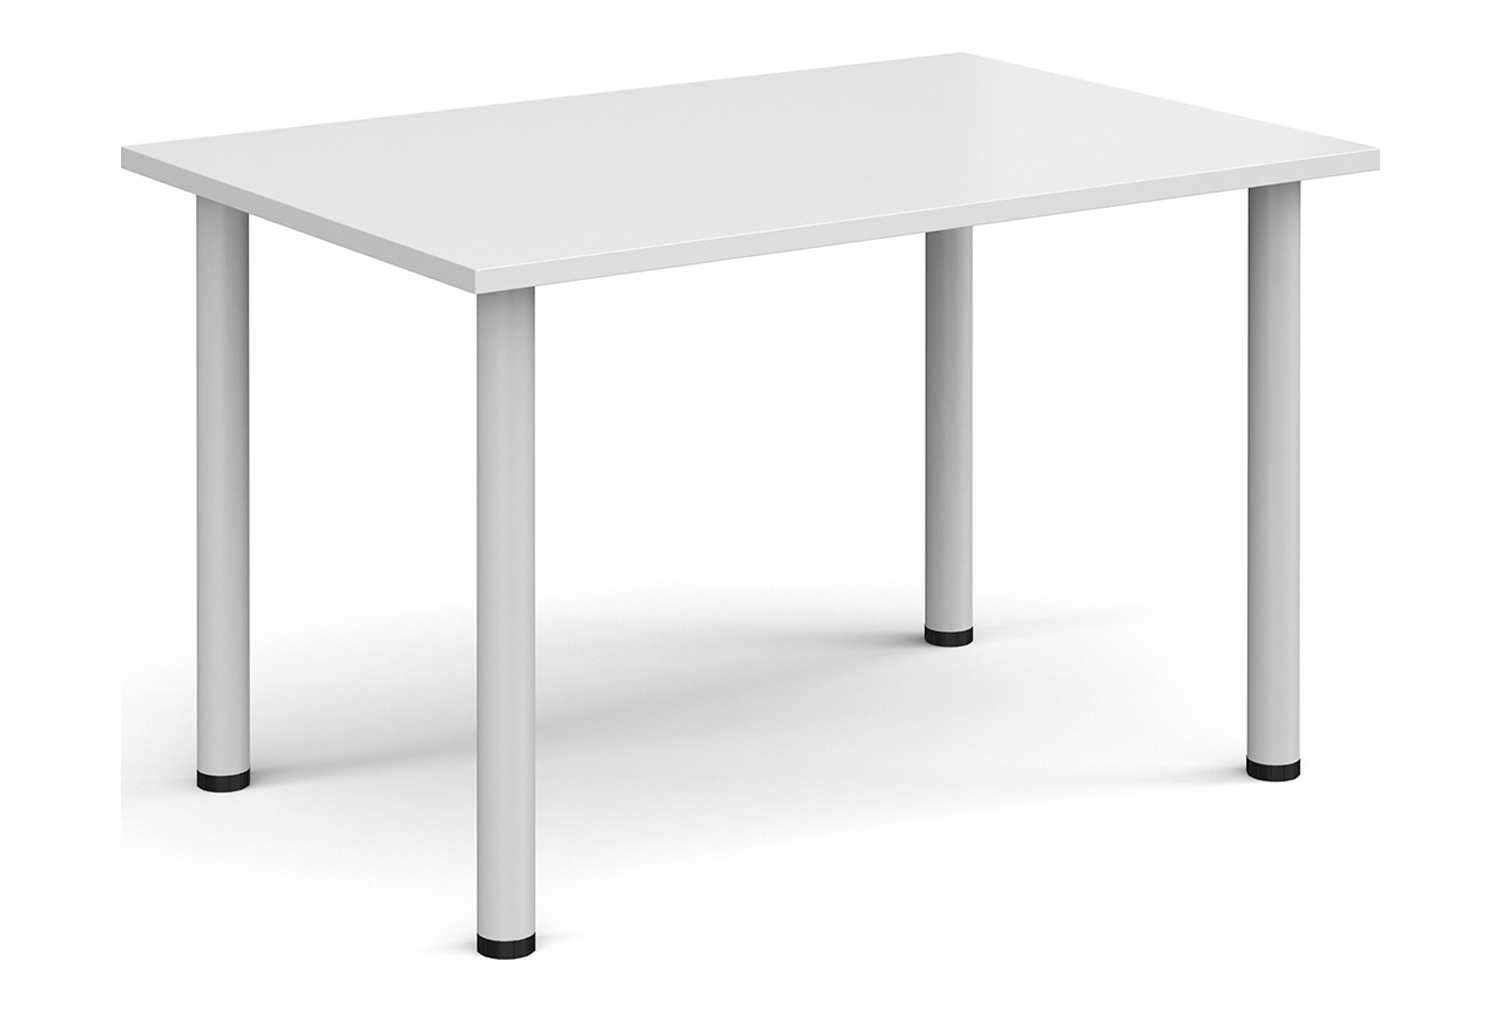 Pallas Rectangular Meeting Table, 120wx80dx73h (cm), White Frame, White, Express Delivery